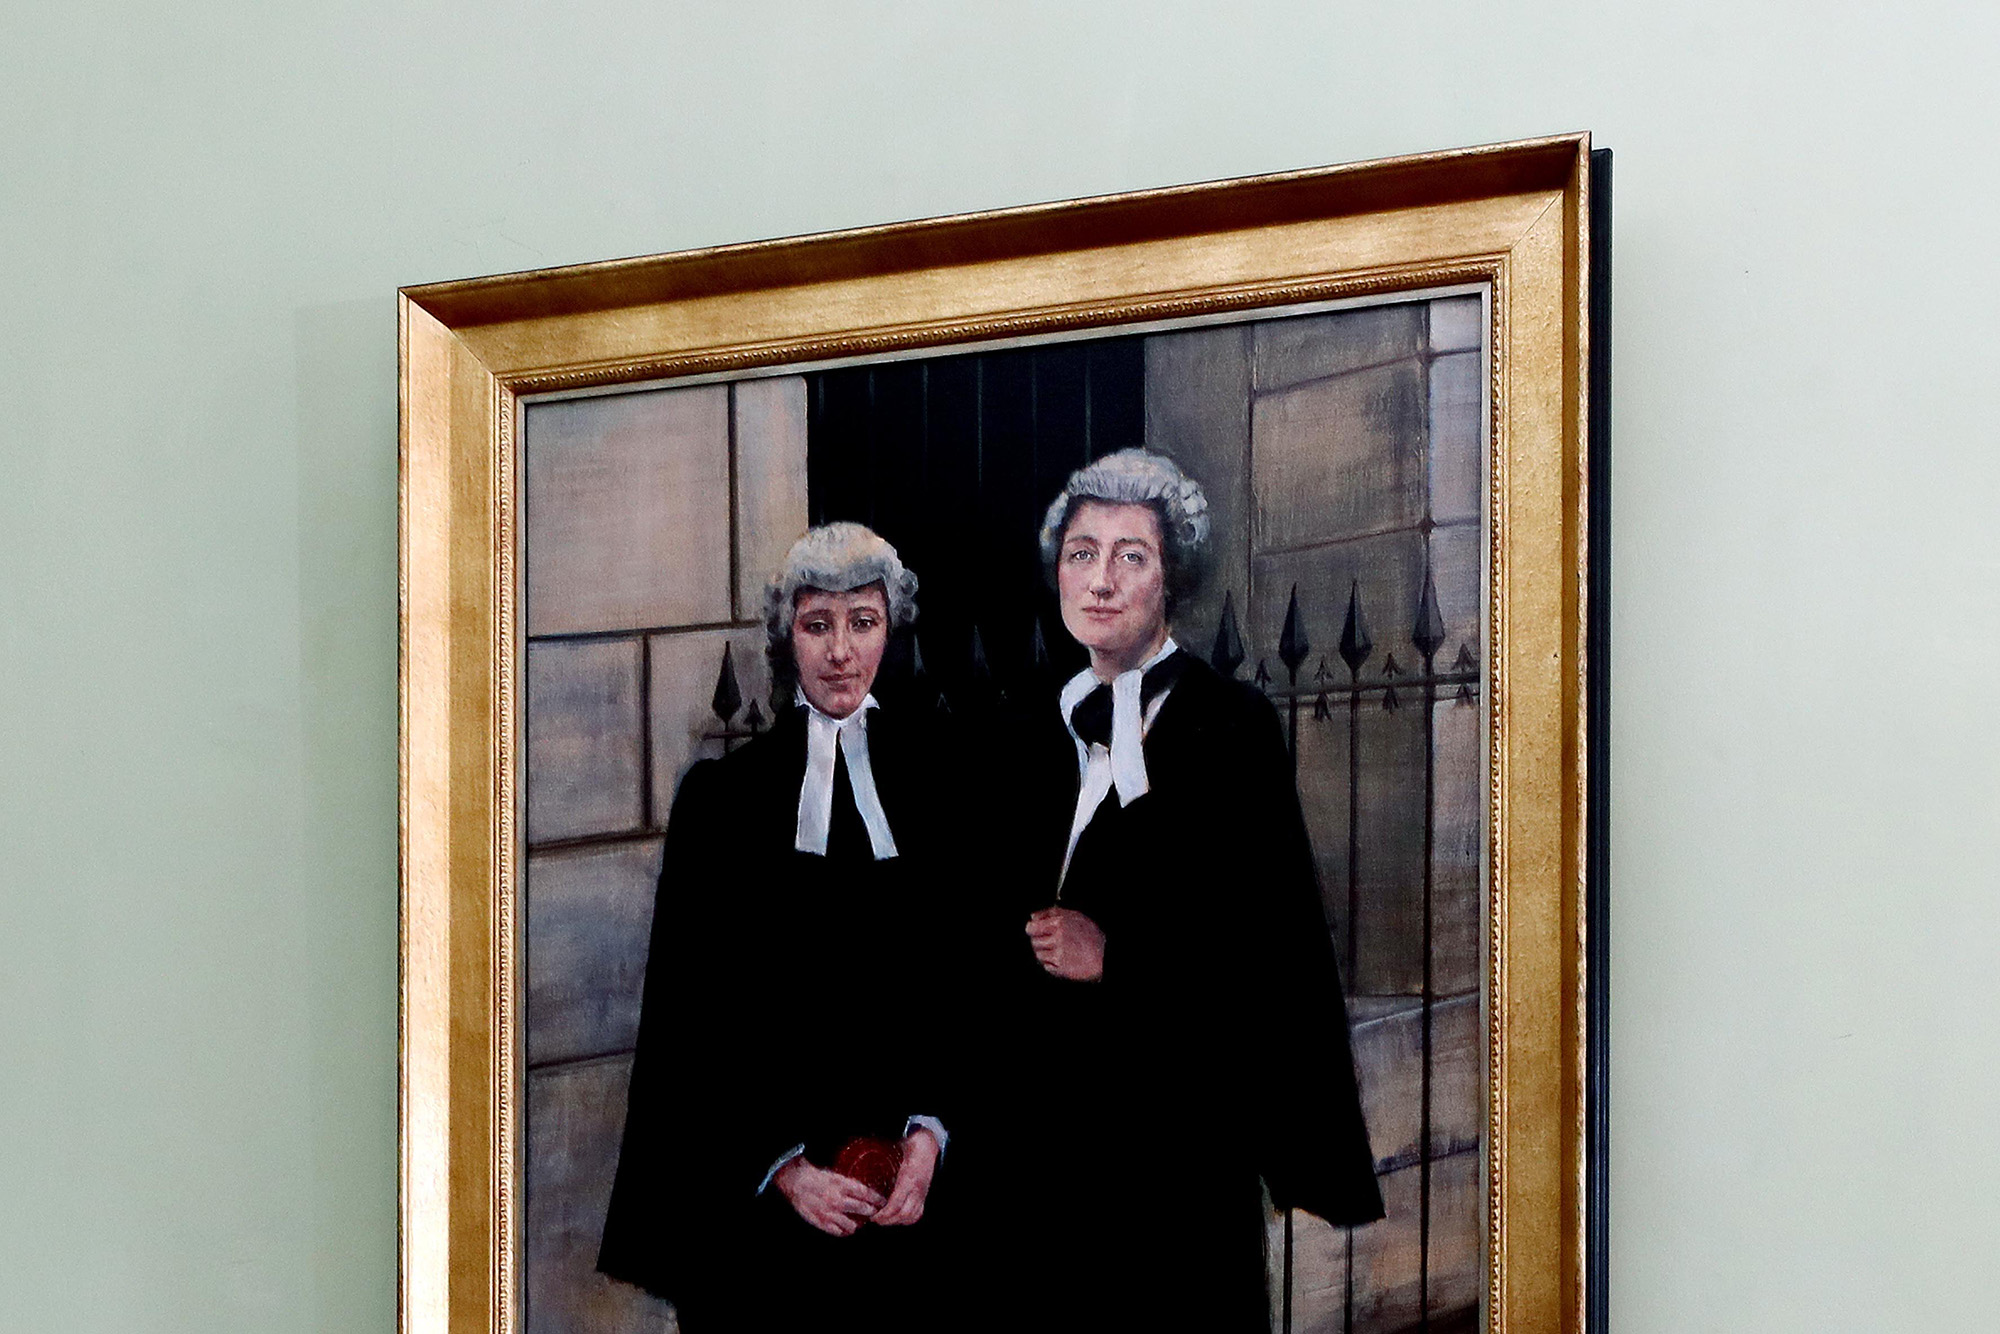 Our Legal Heritage: 101 years since the first women joined the Bar